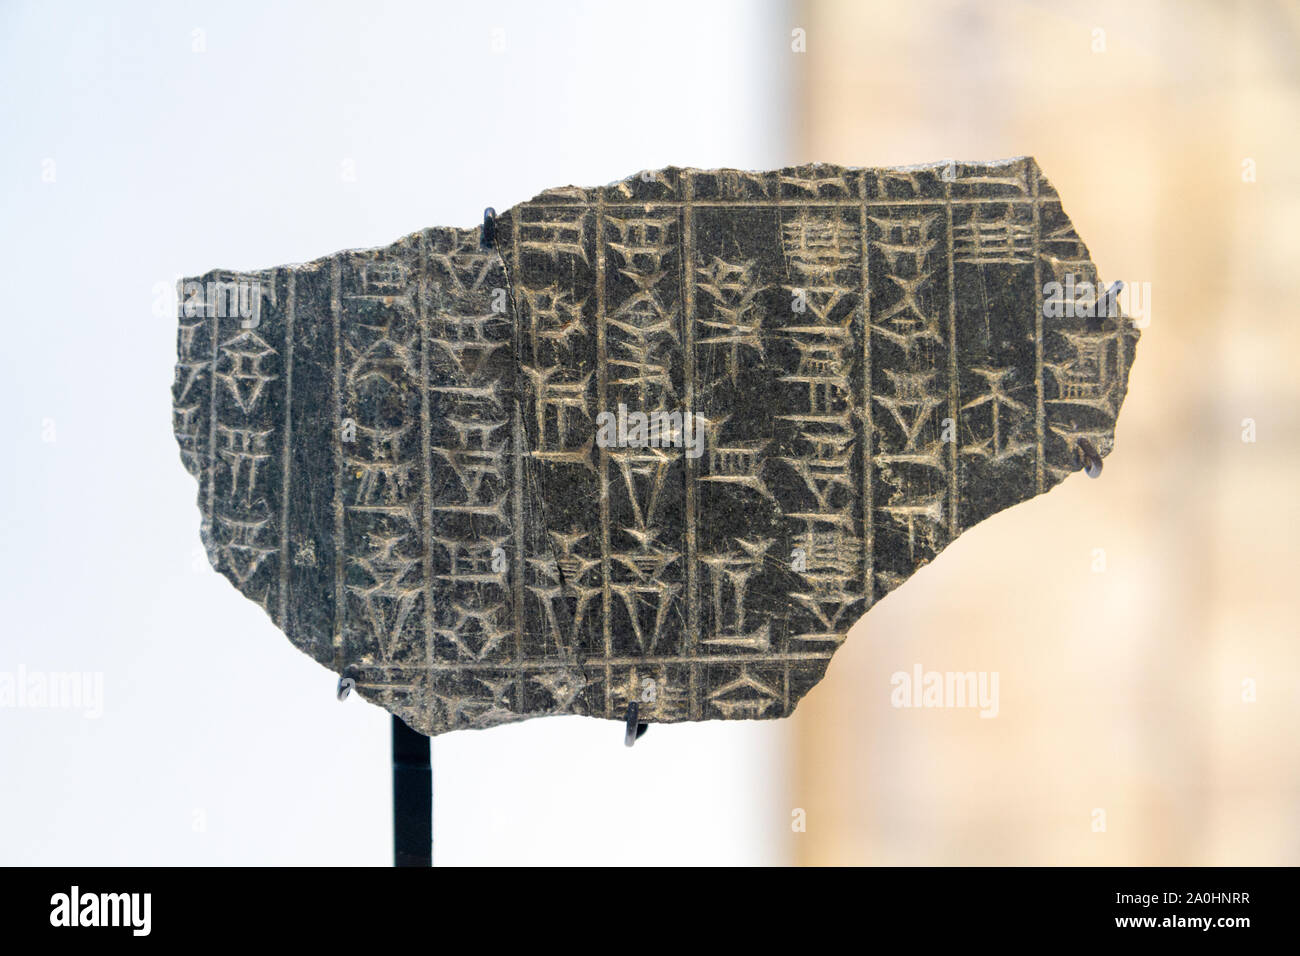 Fragments of stela(e) inscribed with cuneiform script: extracts from the code of King Hammurabi of Babylon (1792-1750 BC). Around 1750BC. Basalt. Stock Photo